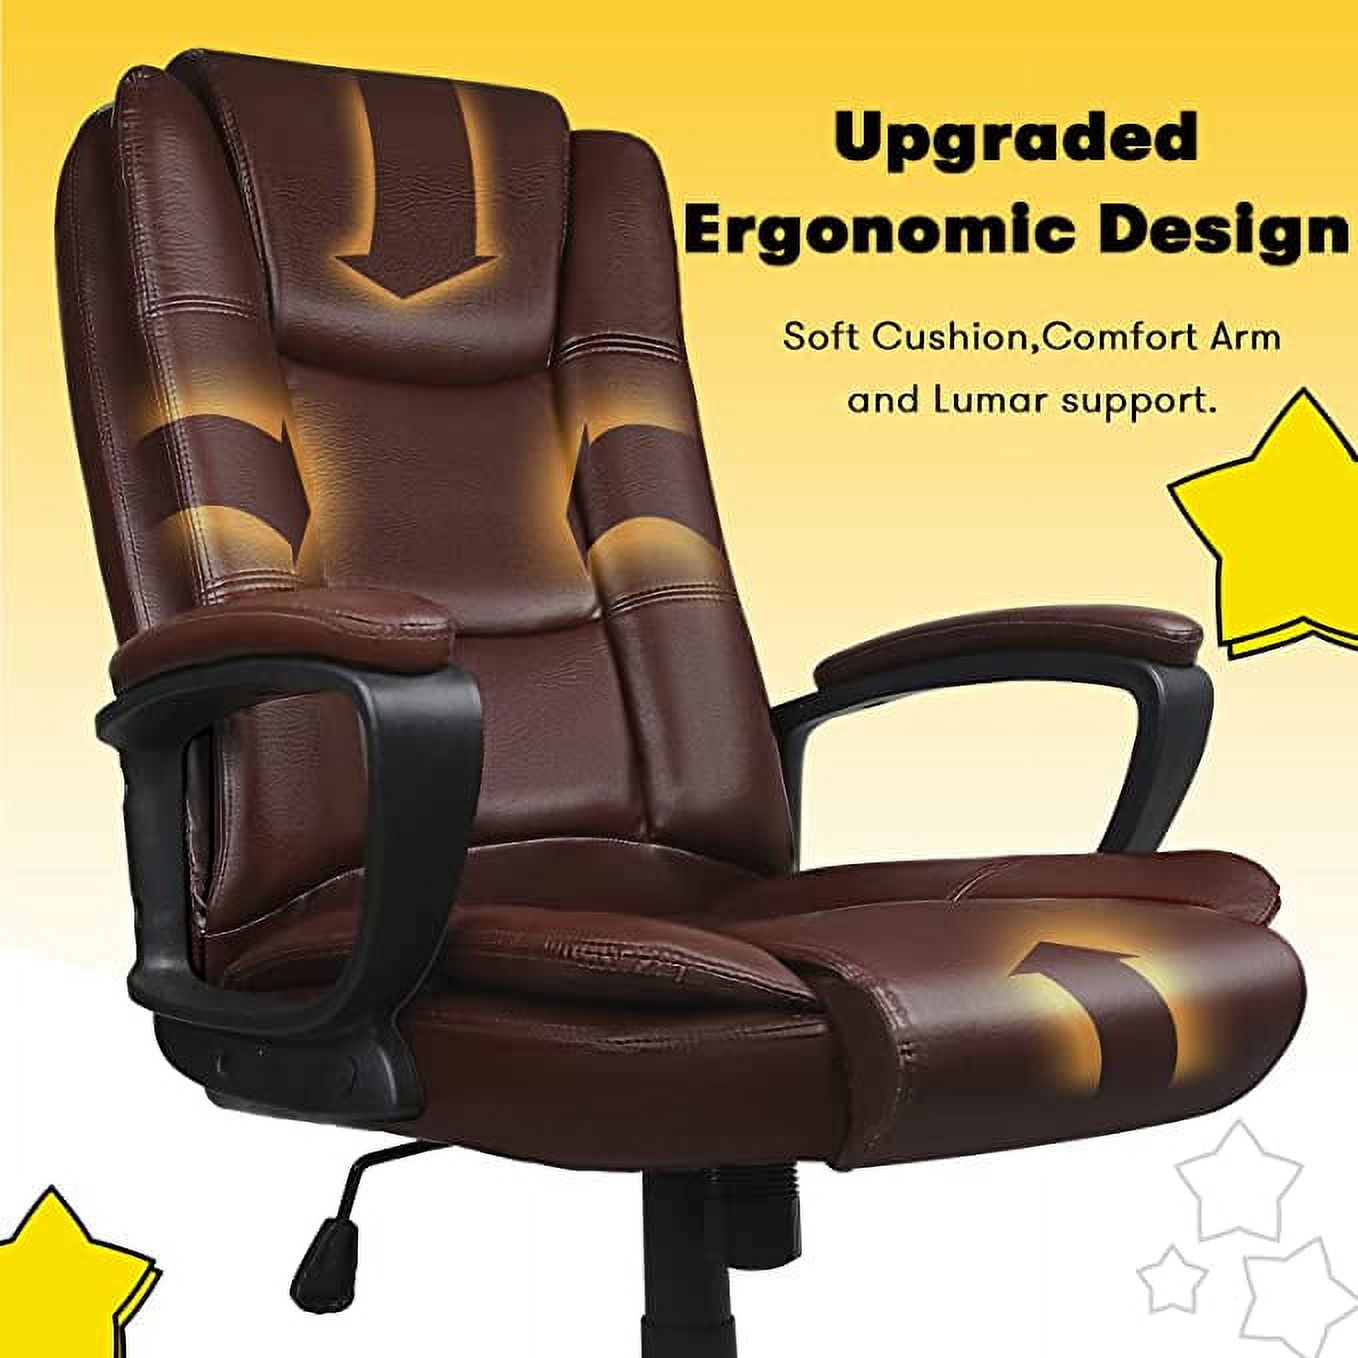 Vitesse Home Office Chair, Big and Tall Chair 8 Hours Heavy Duty Design, Ergonomic High Back Cushion Lumbar Back Support, Computer Desk Chair, , Adjustable Executive Leather Chair With Arms (Brown) - image 2 of 7